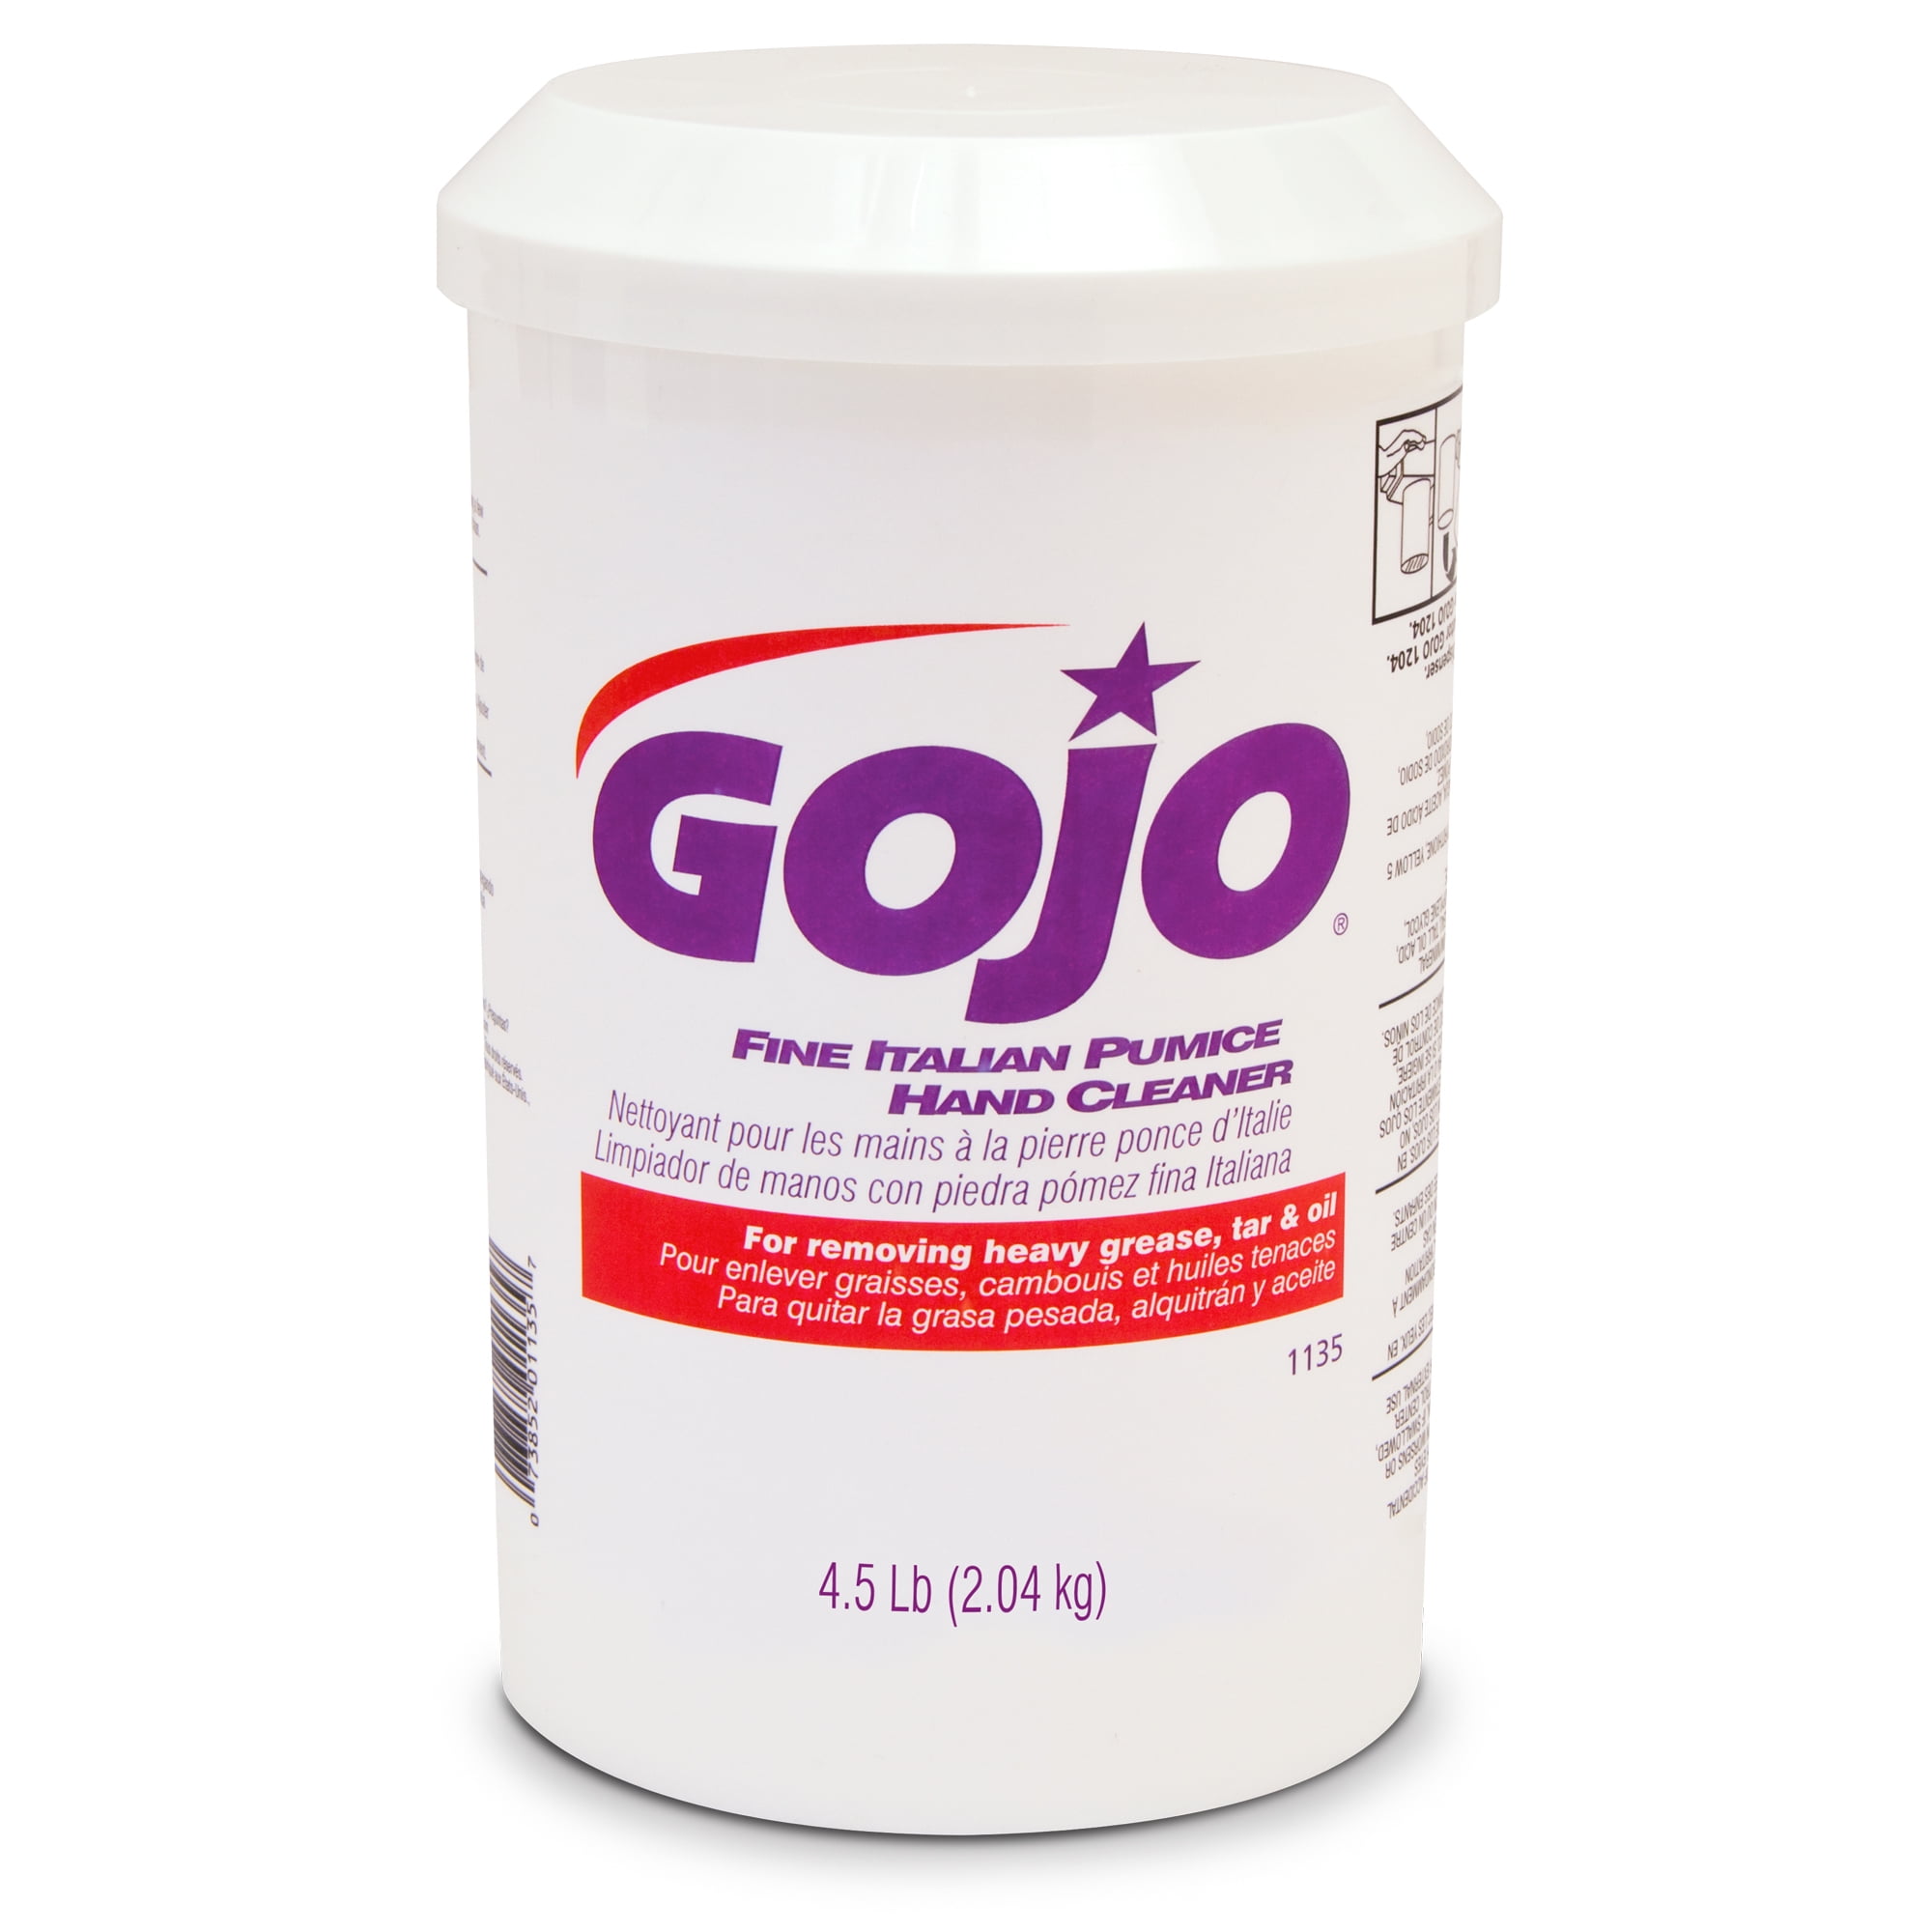 Gojo biodegradable pumice hand cleaner, 2014-04-22, Plumbing and  Mechanical